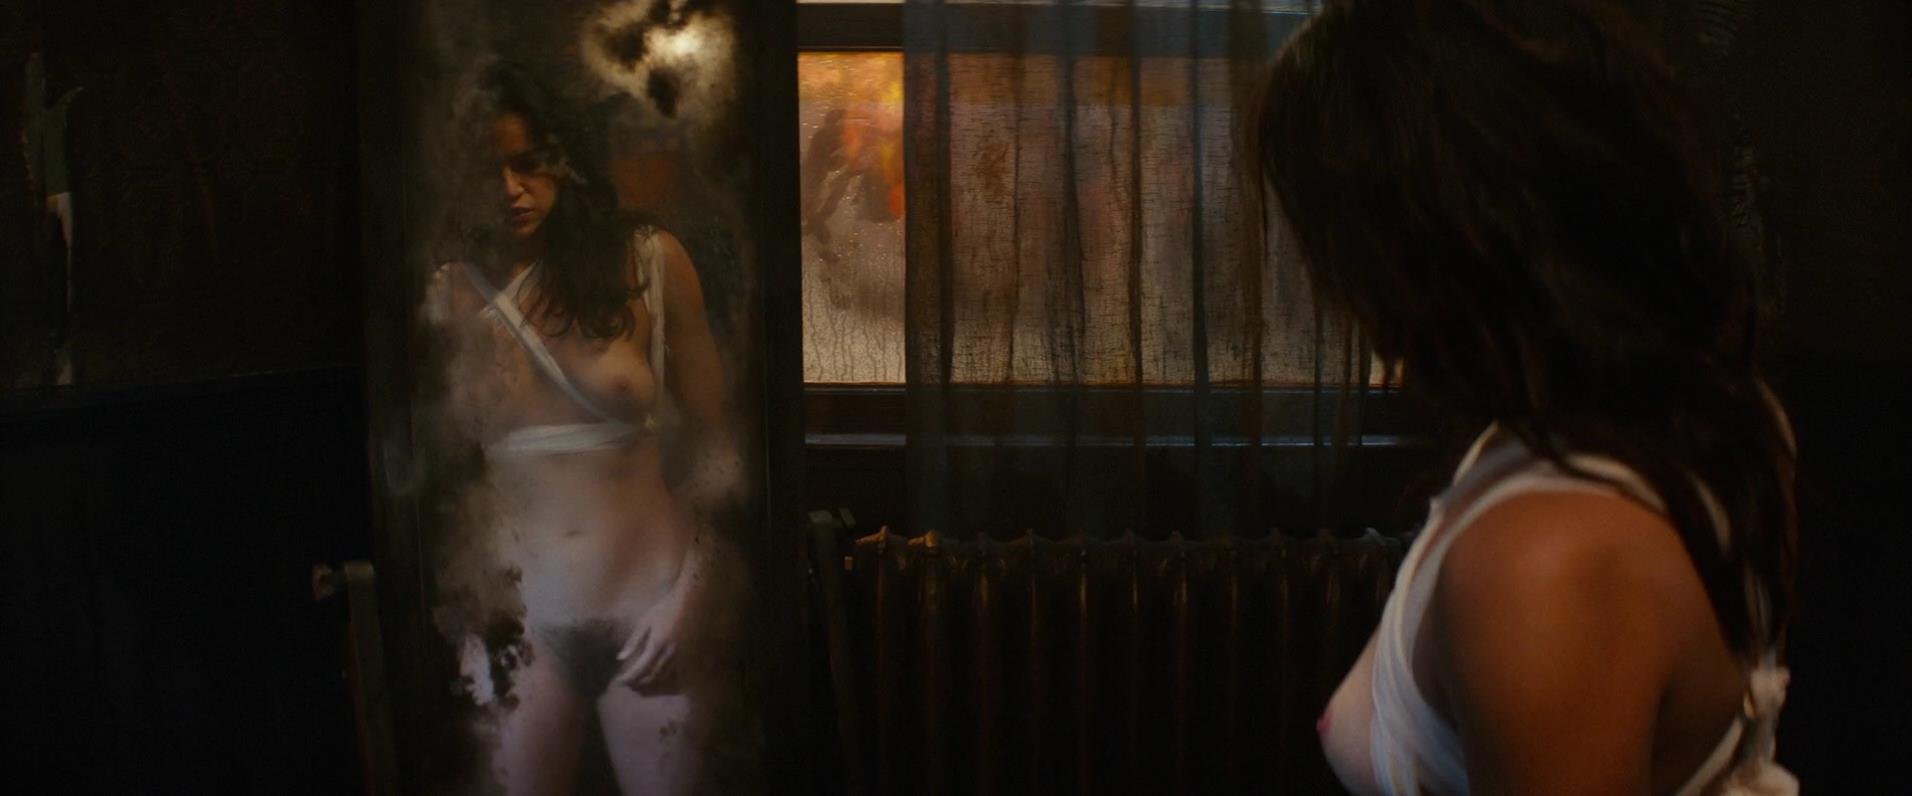 Michelle Rodriguez, Caitlin Gerard Nude - The Assignment (39 Pics + GIFs & Video)